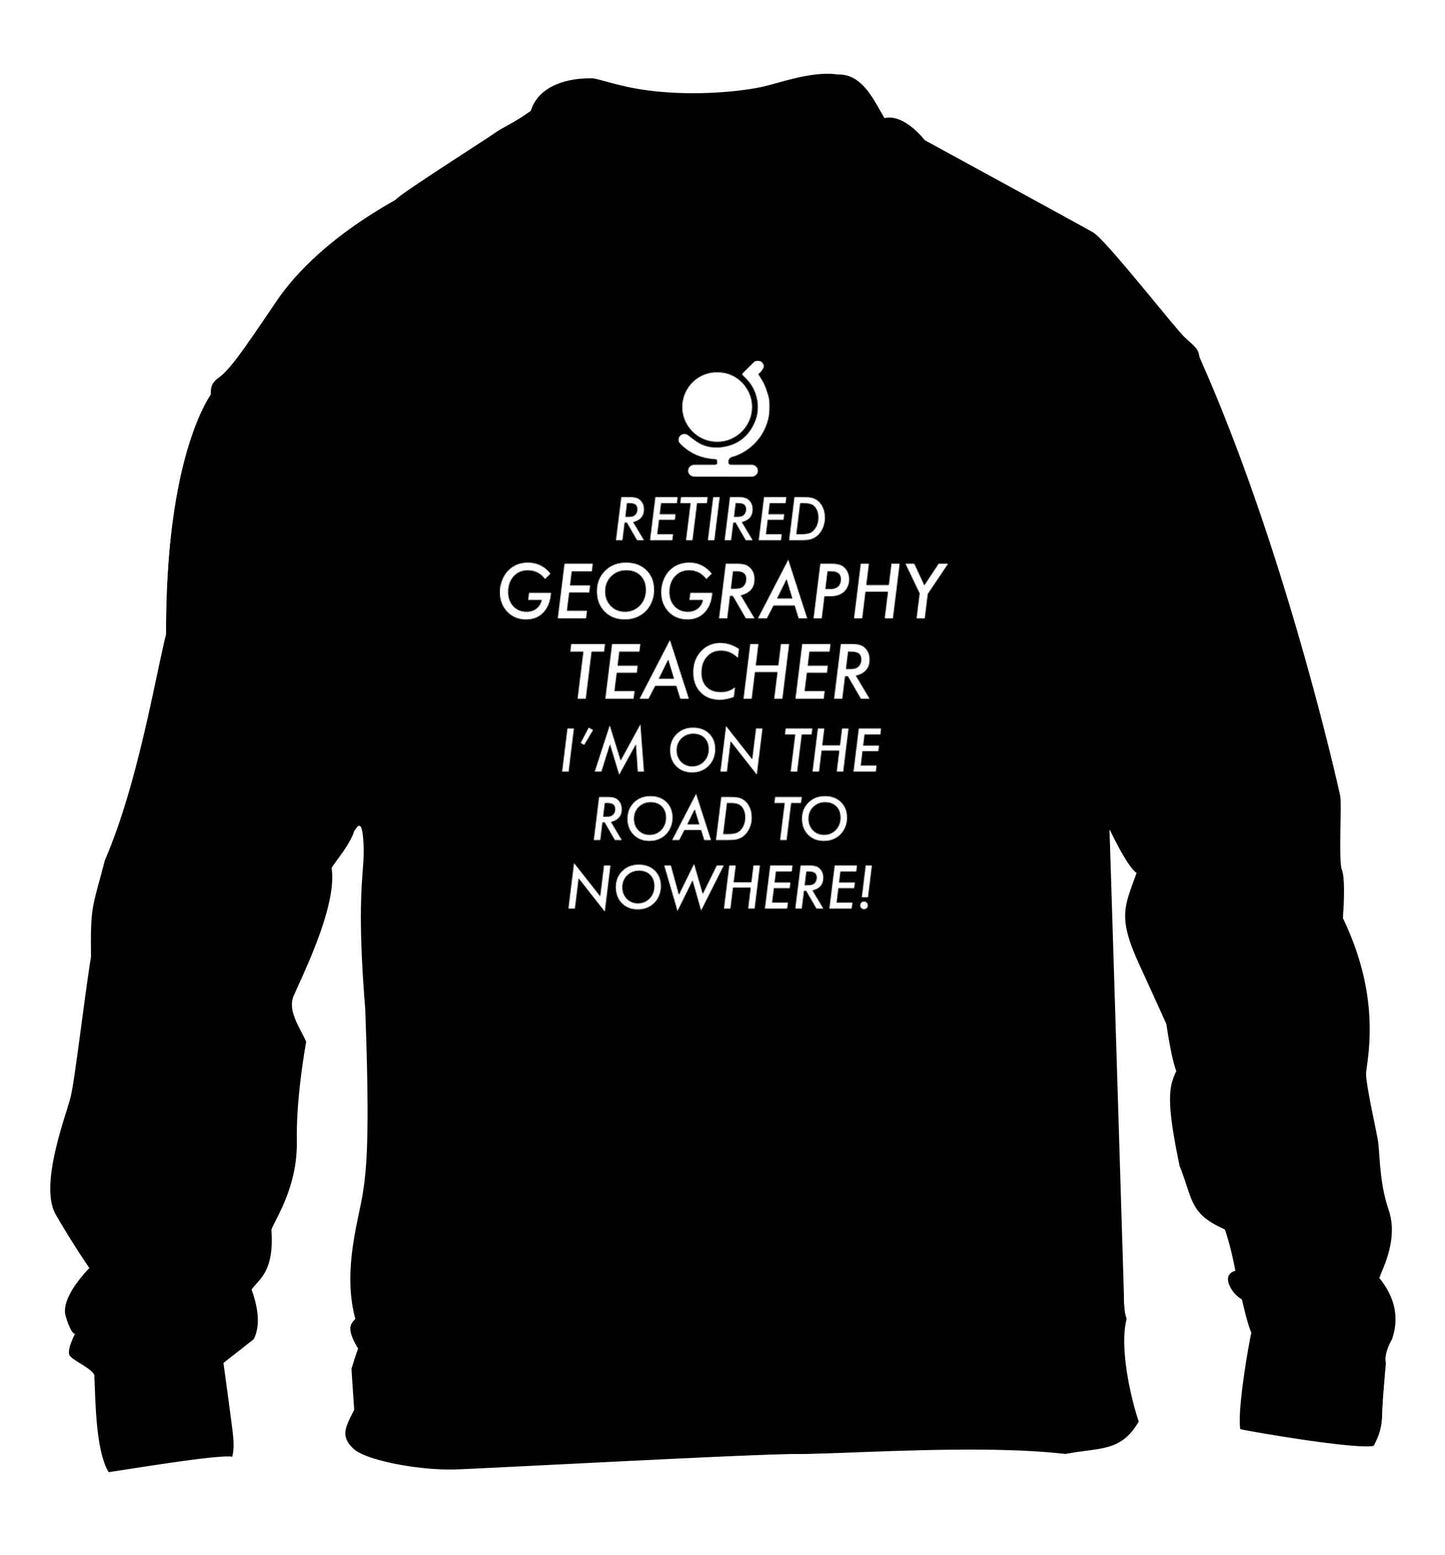 Retired geography teacher I'm on the road to nowhere children's black sweater 12-13 Years